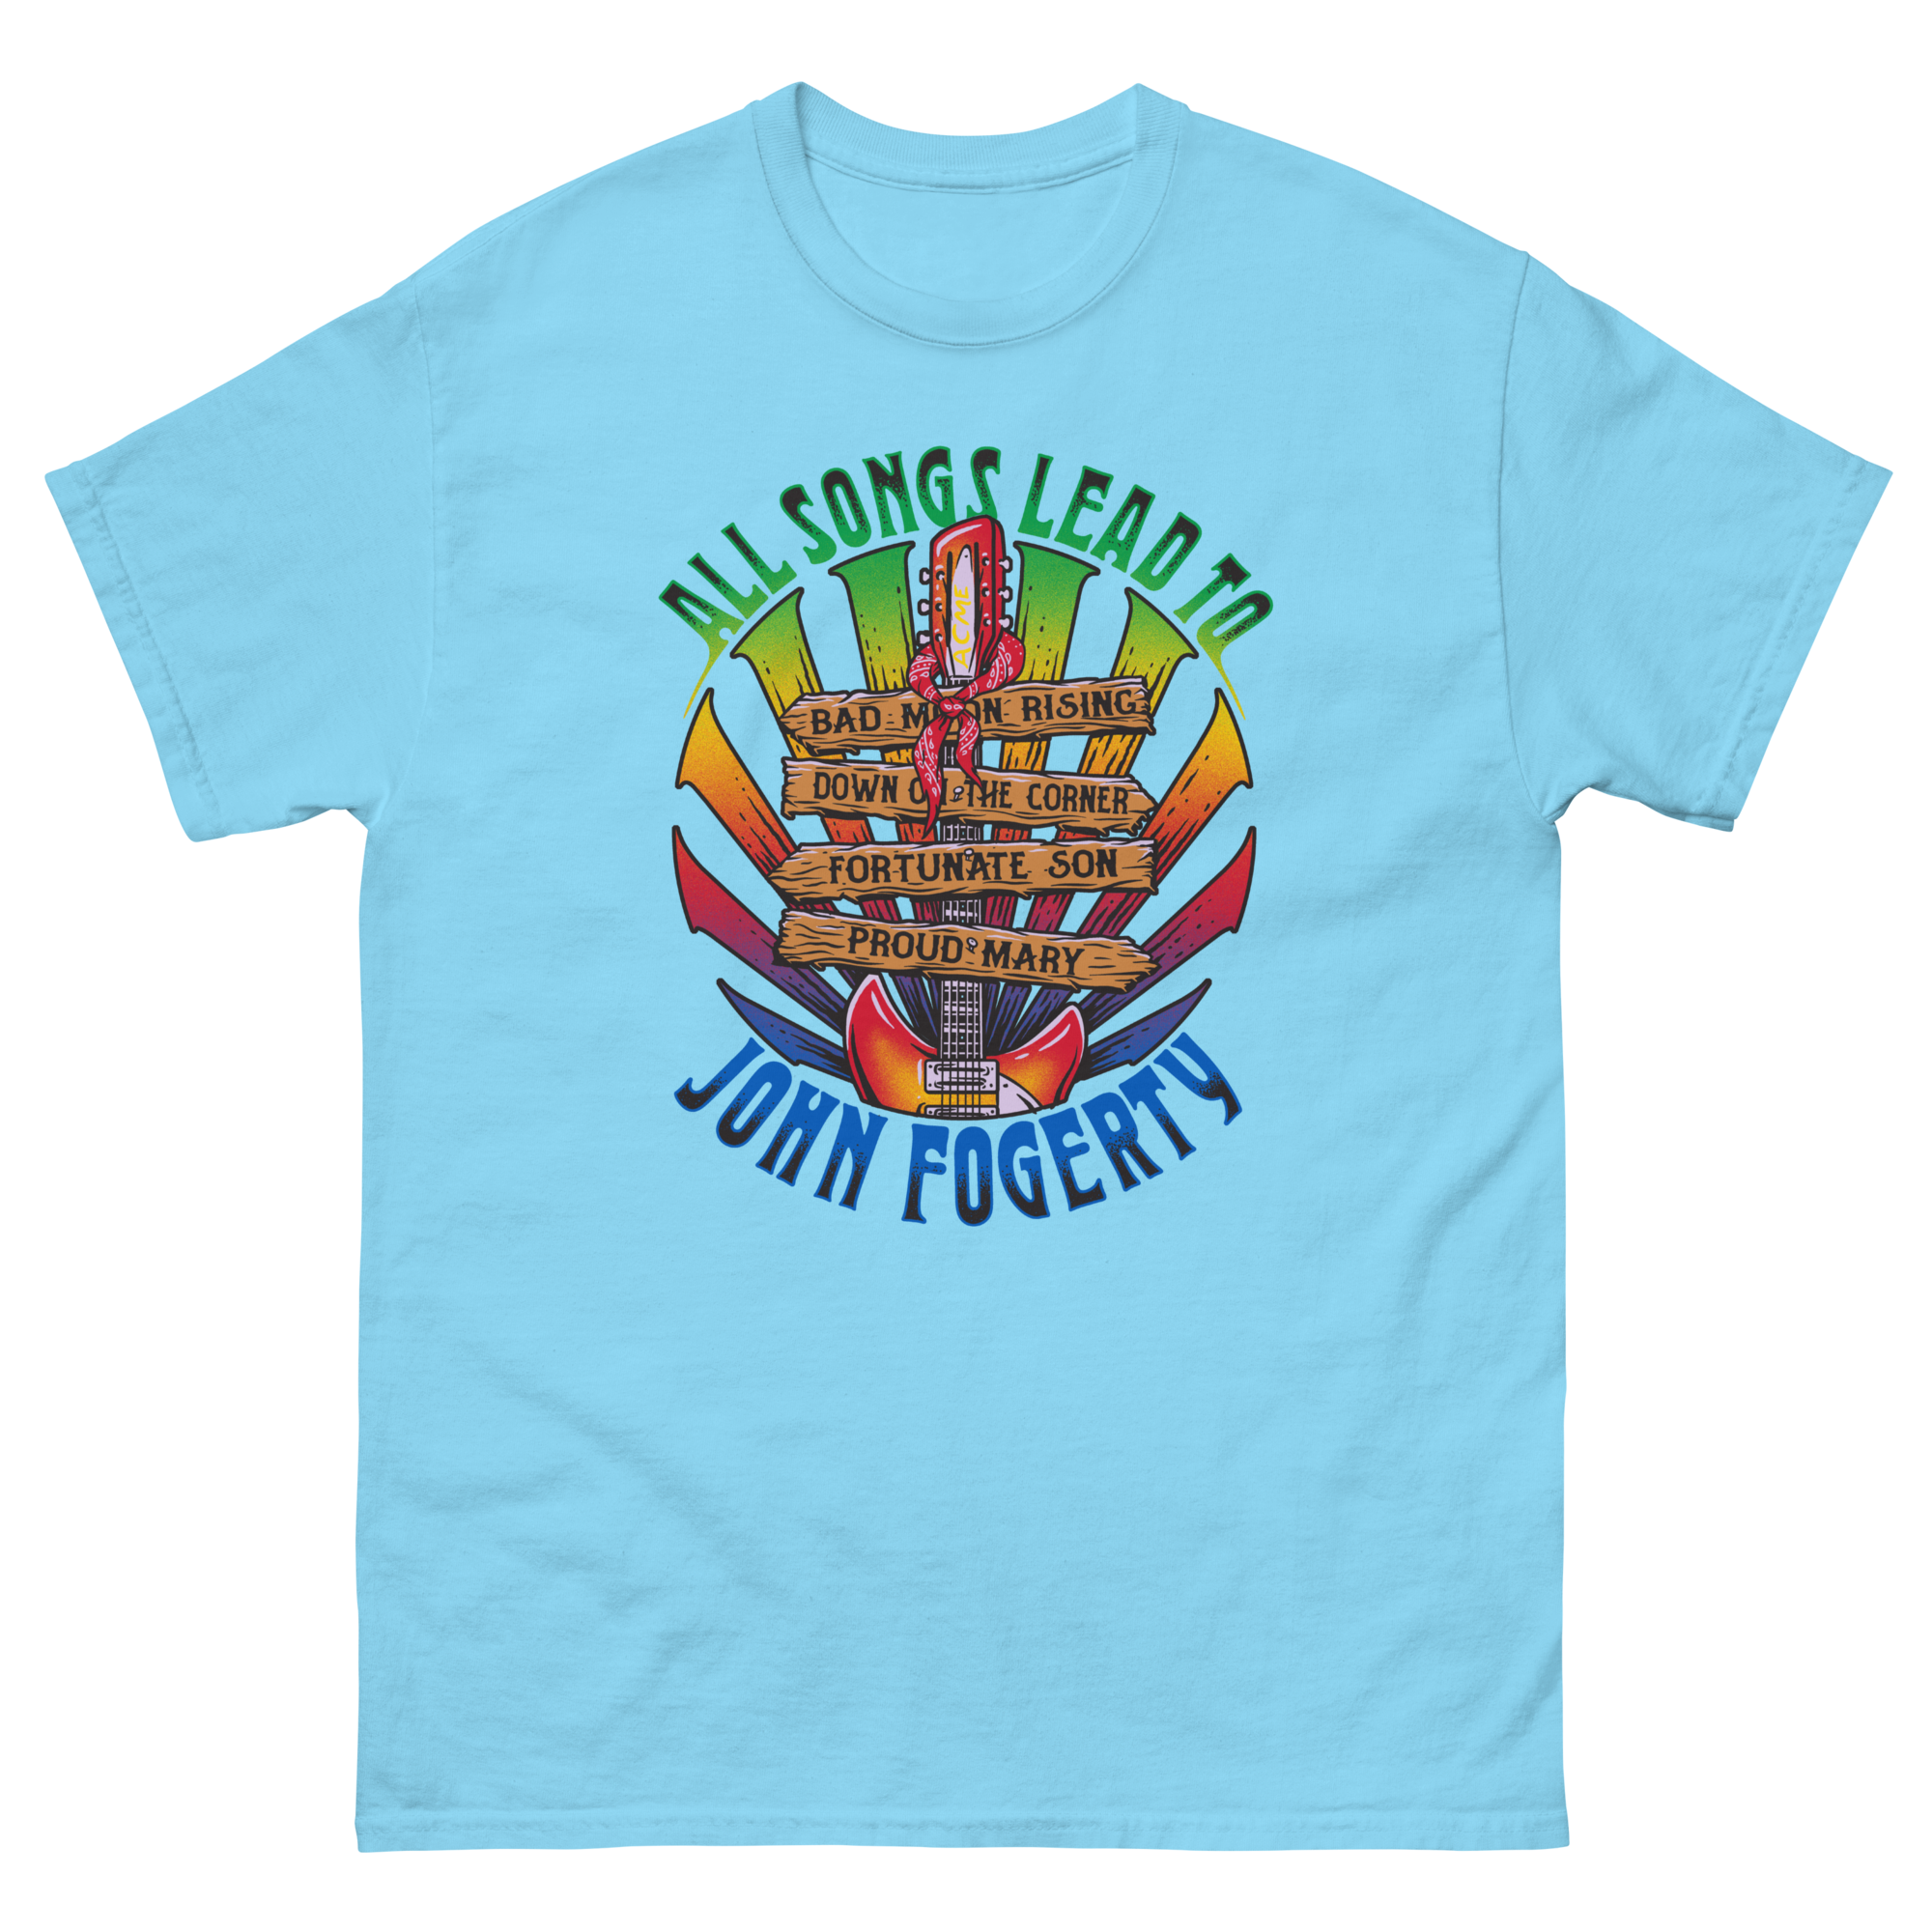 All Songs Lead To Fogerty Men's Tee